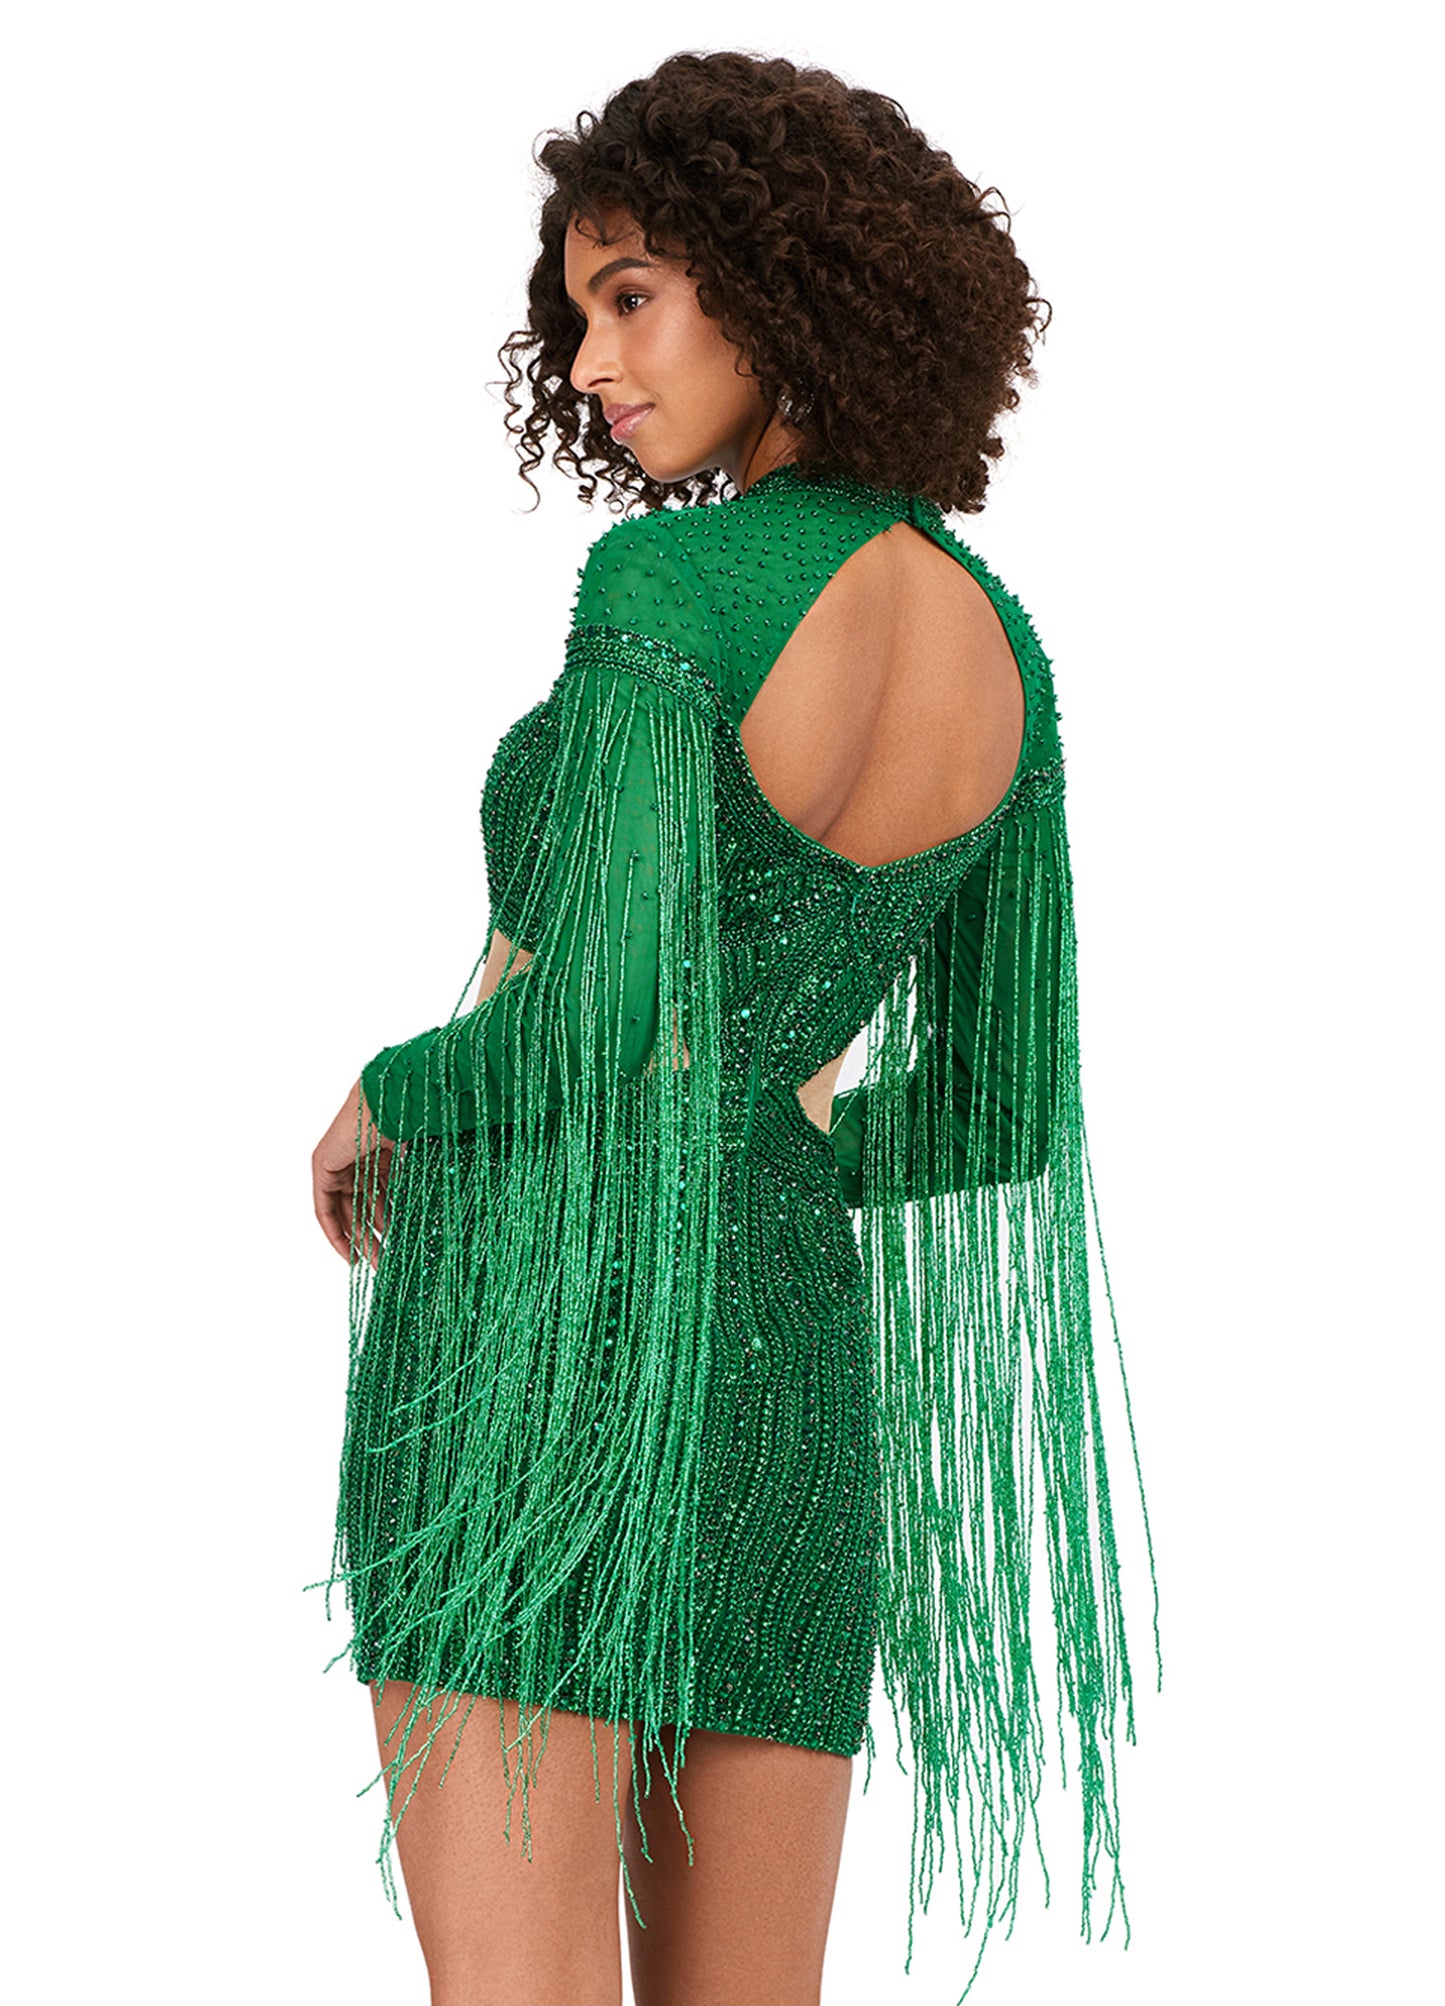 Ashley Lauren 4601 Long Sleeve Cutout Beaded Fringe Backless Cocktail Dress Formal Gown Make an entrance that is sure to steal the show. This fully beaded cocktail features a sweetheart neckline, open back and illusion cut outs at the waist. Long sleeves with fringe complete the look! Sweetheart Neckline Illusion Cut Outs at Waist Fitted Skirt Fringe Sizes: 0-16 Colors: Black, Silver, Emerald, Gold